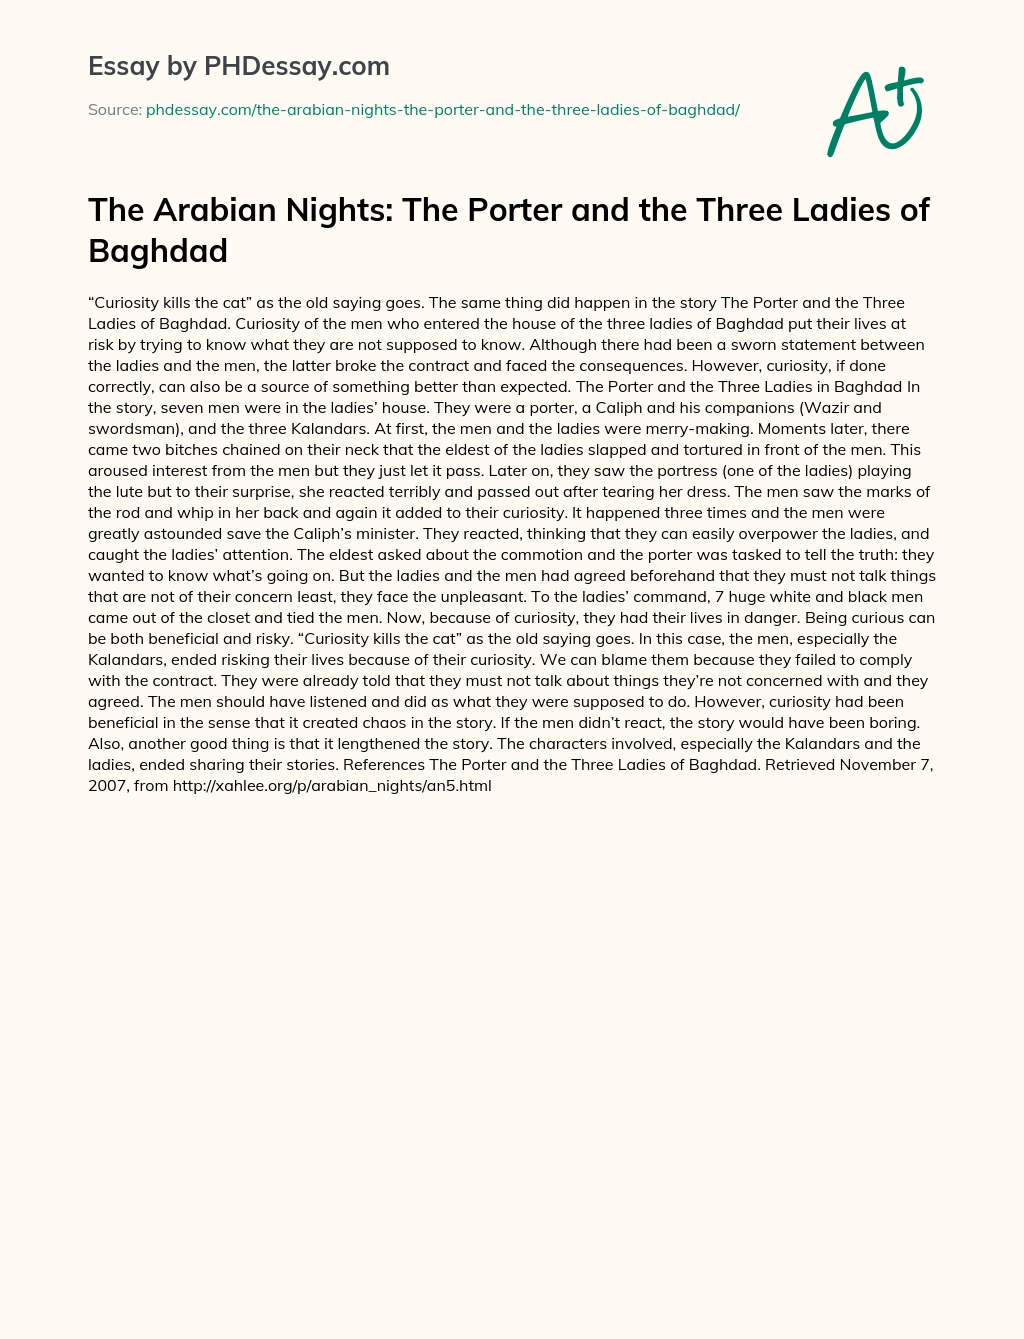 The Porter and the Three Ladies of Baghdad essay